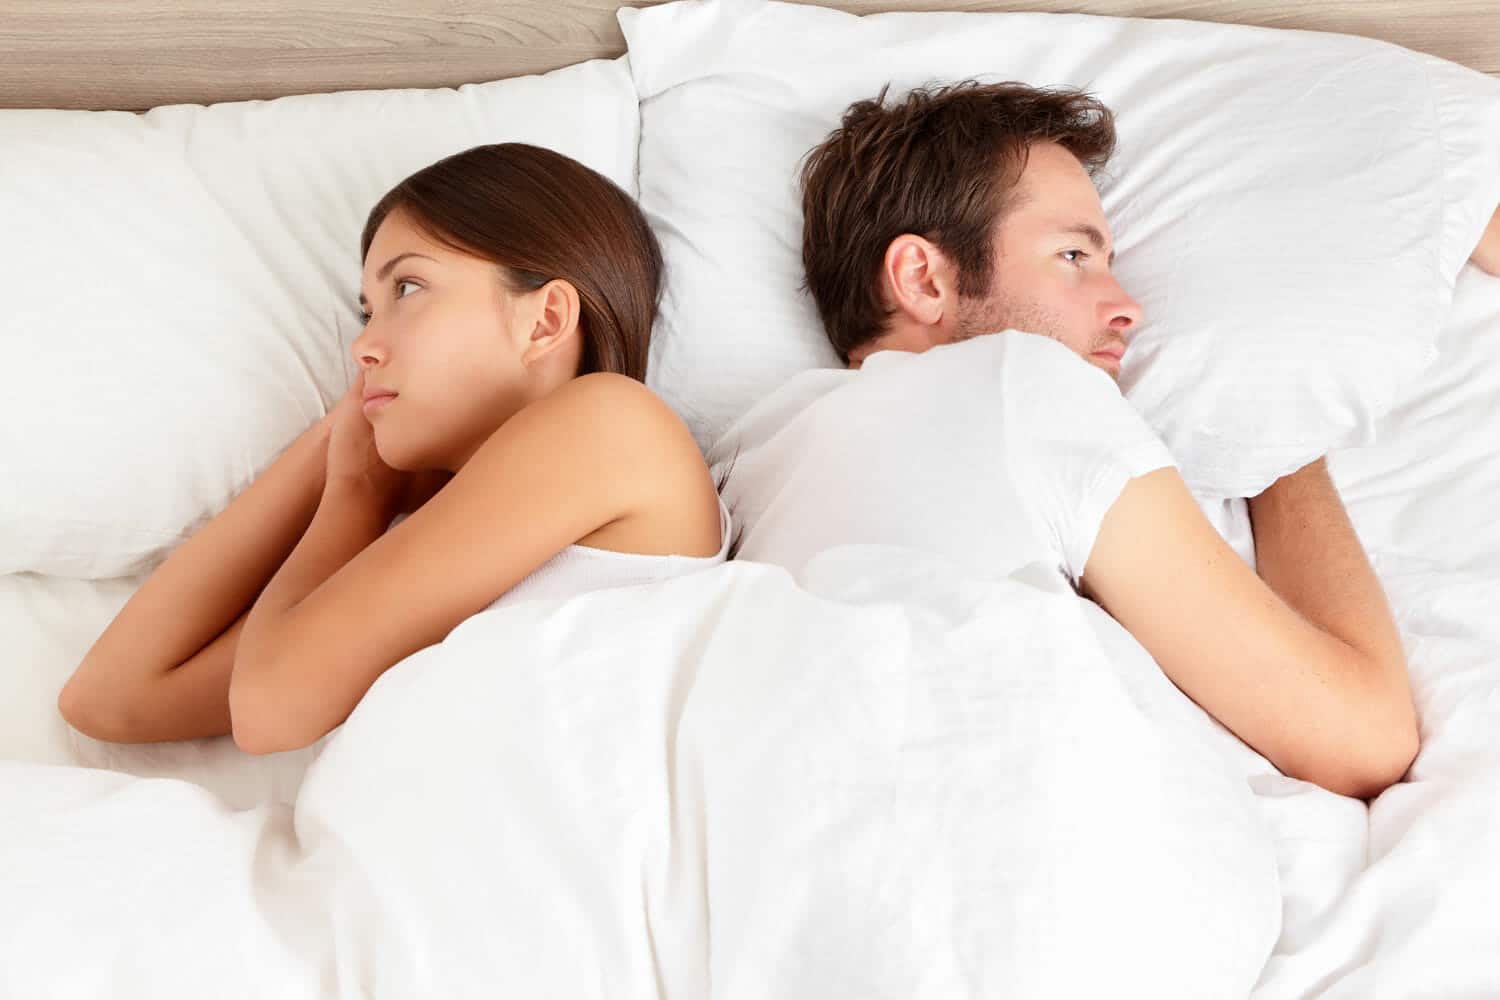 Can I Sleep With My Wife During a Divorce? 